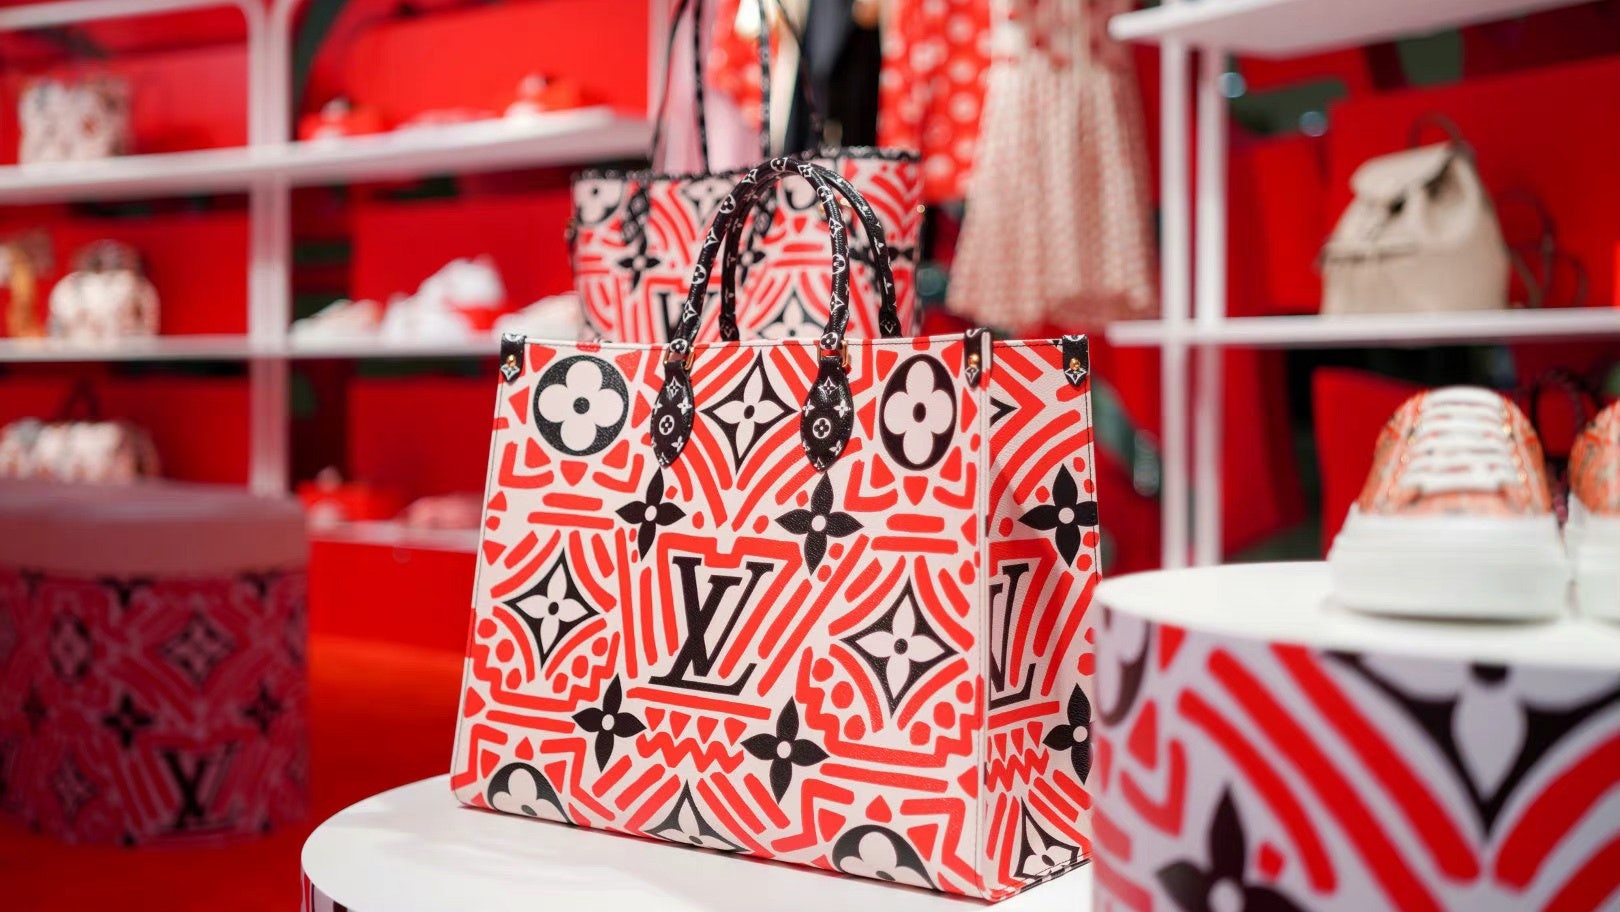 Chinese Gen Zers are shifting more toward wearing a China-Chic style because it gives them a sense of confidence. But could luxury brands market them? Photo: Louis Vuitton's Weibo